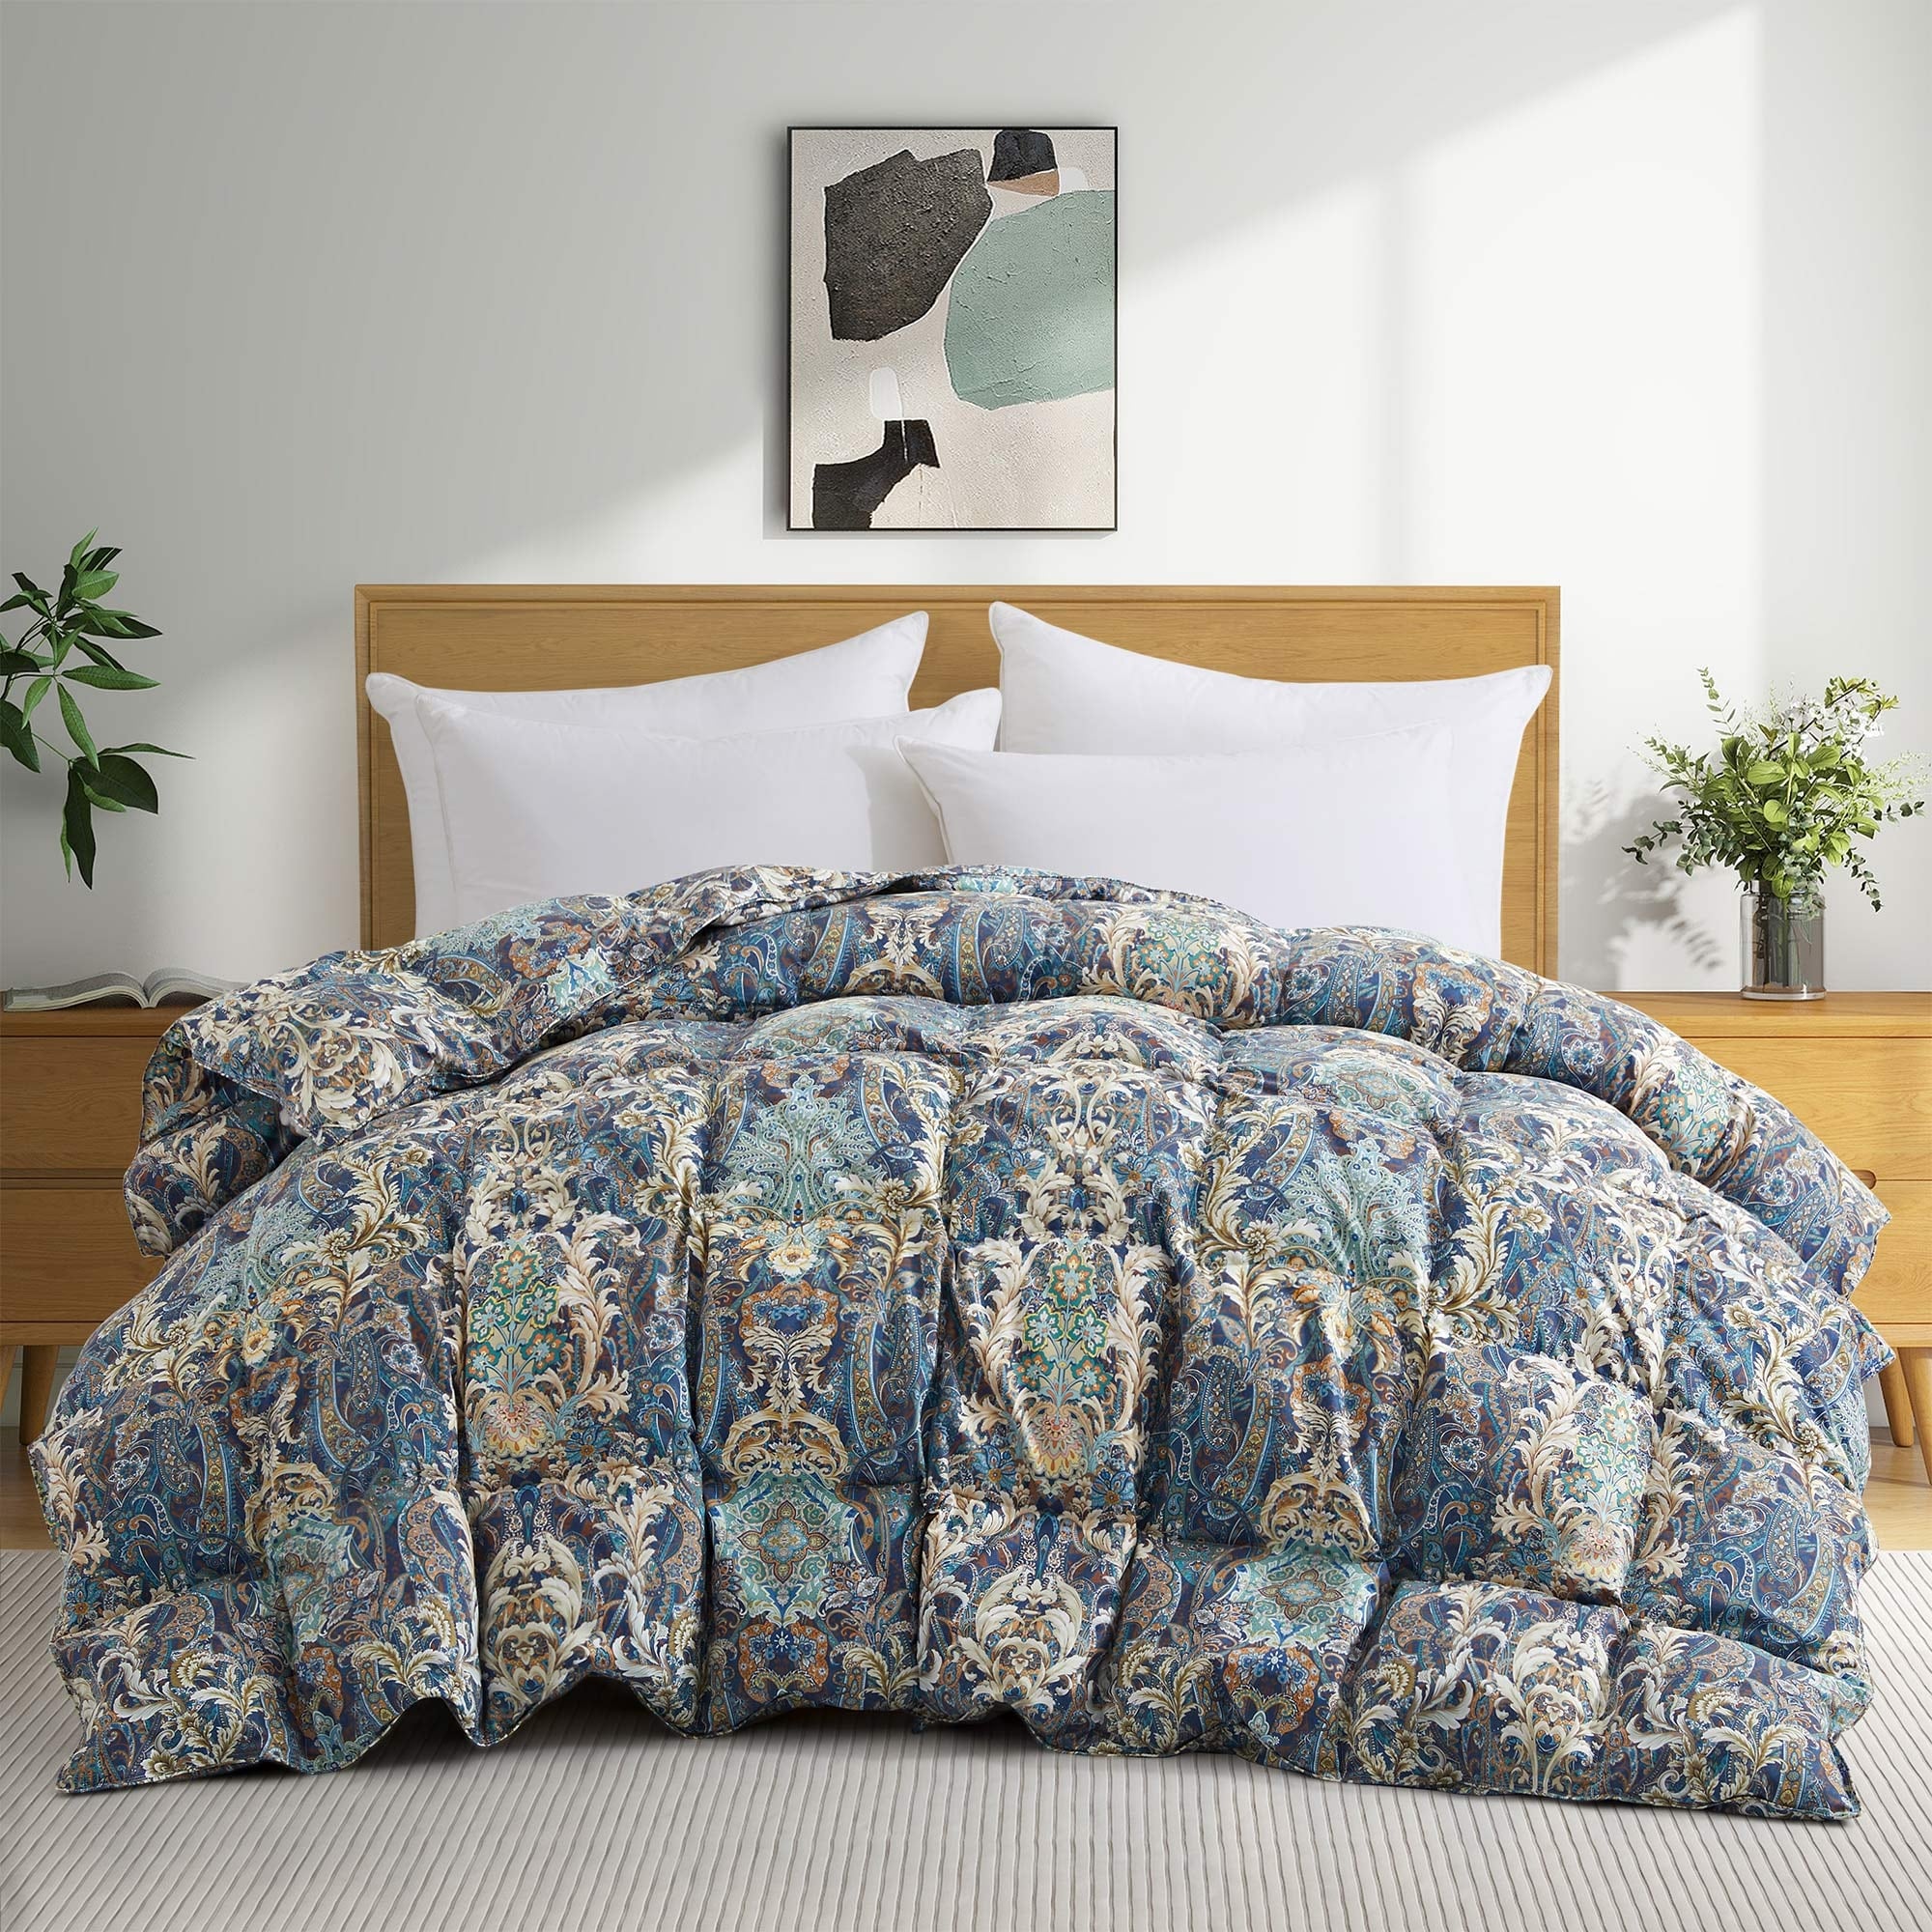 All Season Paisley Floral Printed White Goose Feather Down Comforter